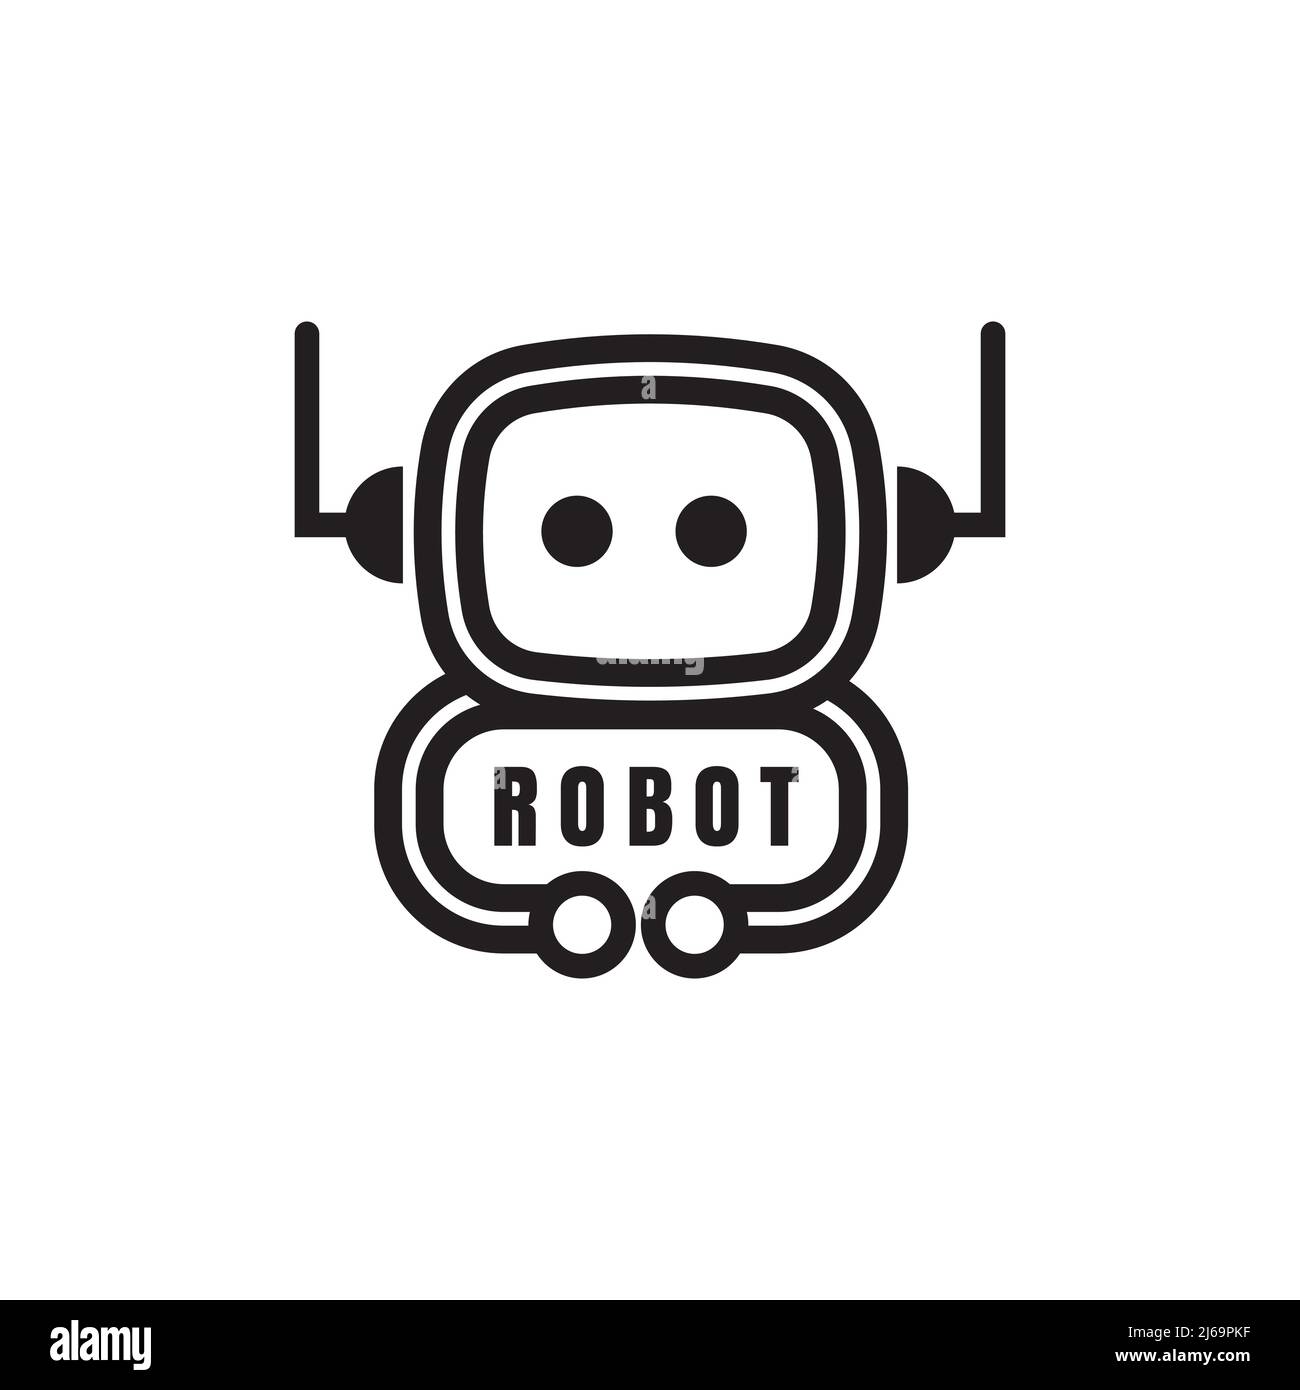 Robot Cute Cartoon Vector Icons Illustration. Premium Isolated Vector Science Technology Icon Concept. Stock Vector